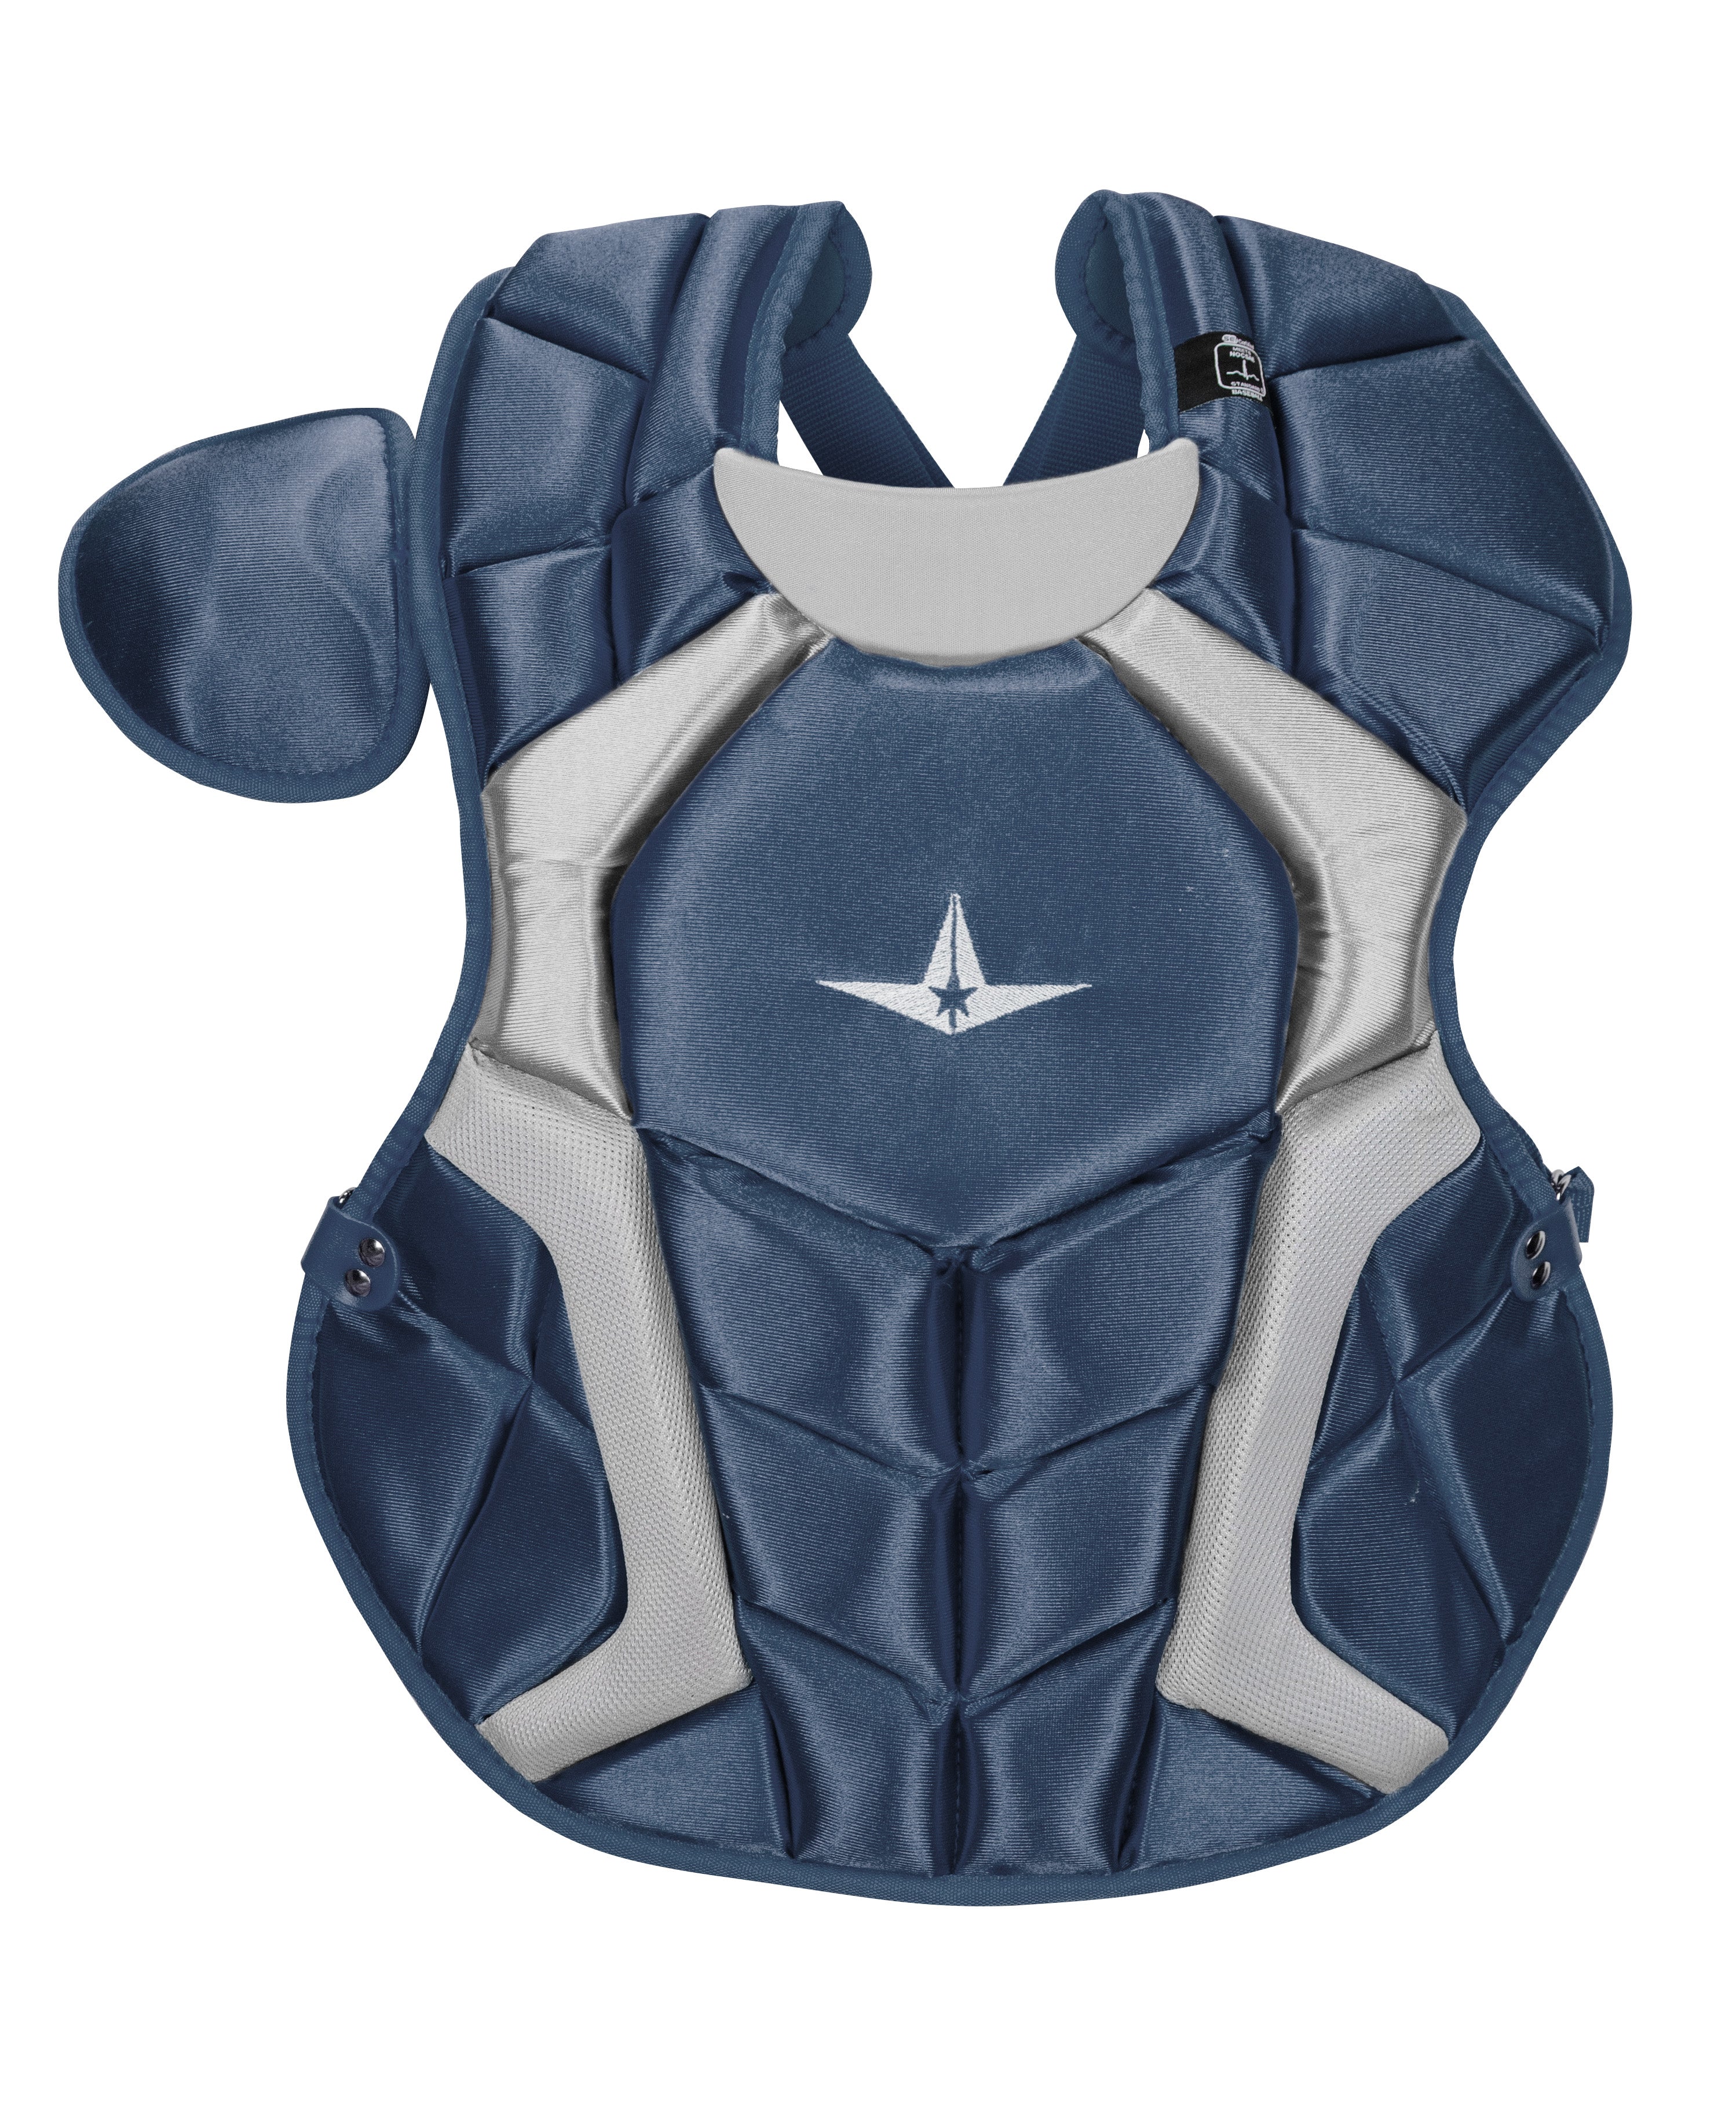 All Star SEI Certified System 7 Axis Youth Chest Protector CPCC912S7X